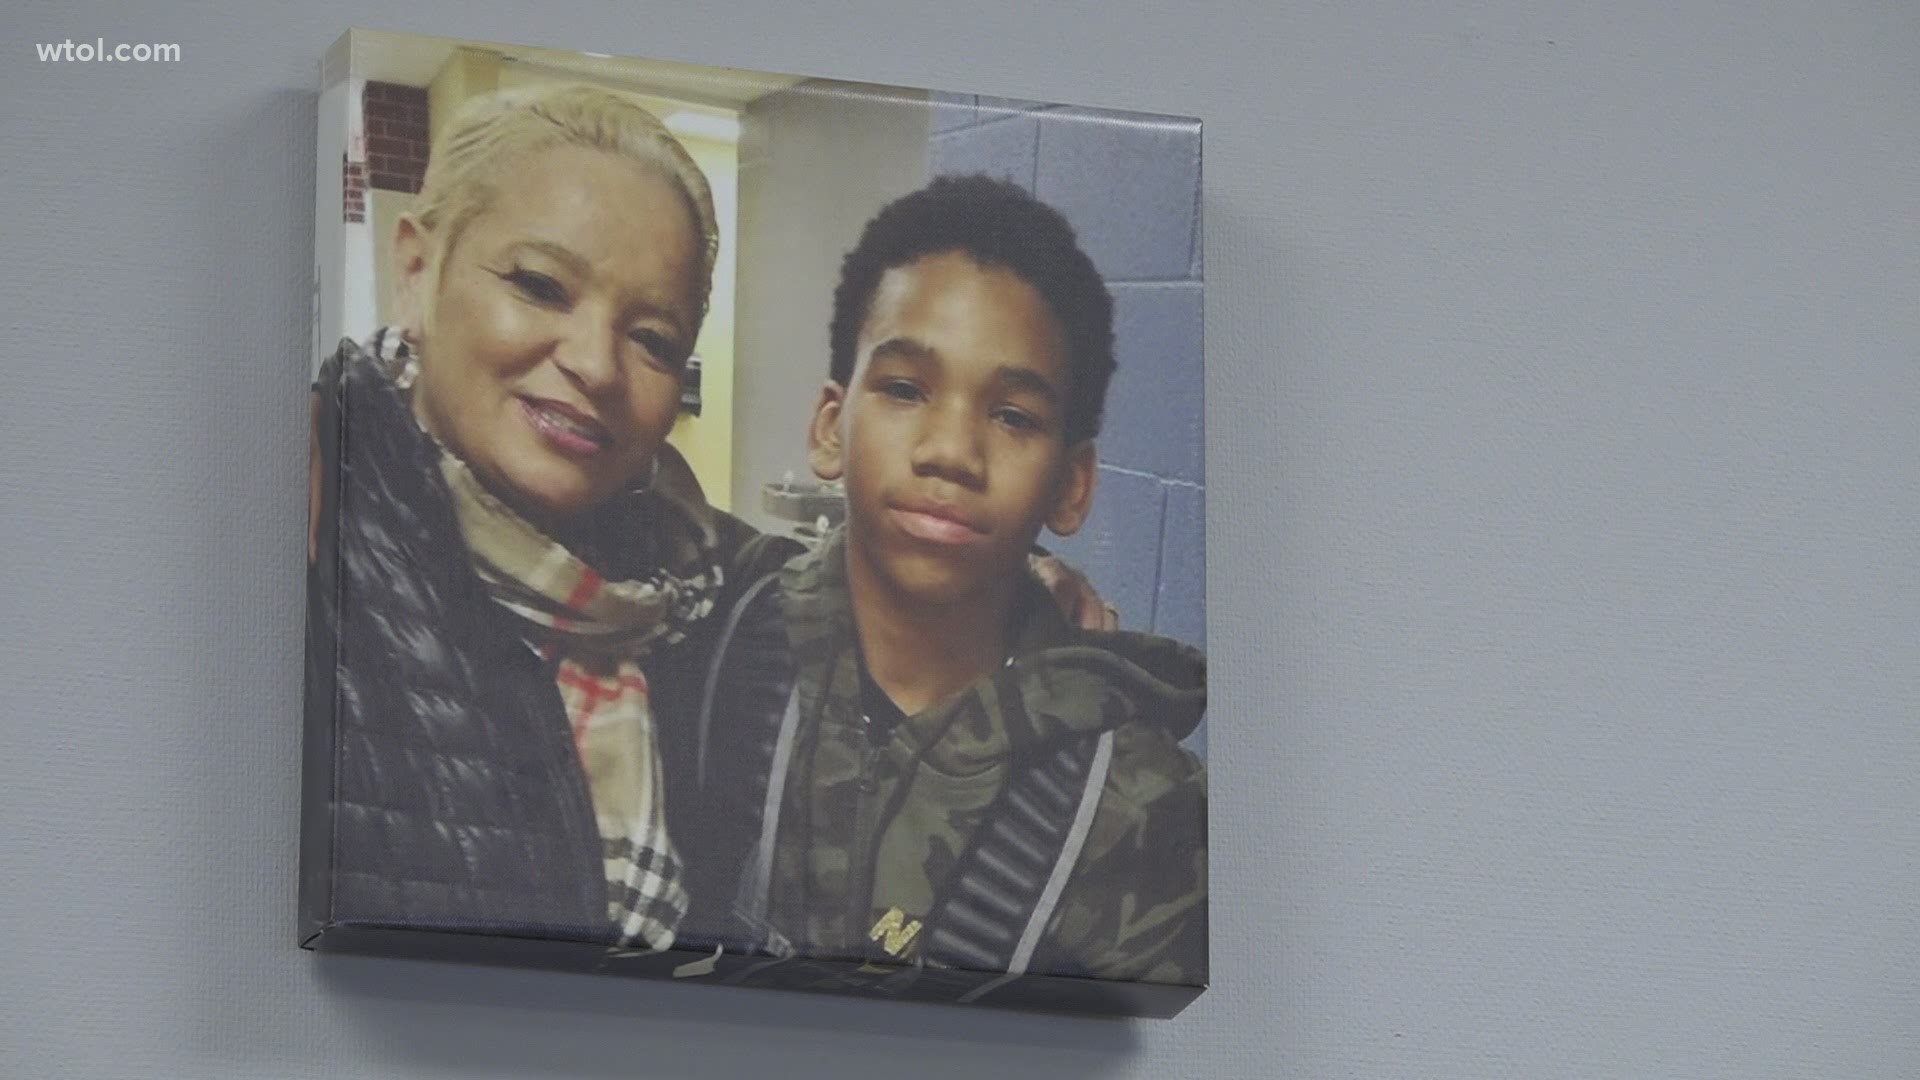 Instead of feeling relief, Nareon Grier's grandmother Tina Butts says the arrest is causing more pain. To her, the arrest means the loss of two kids to gun violence.